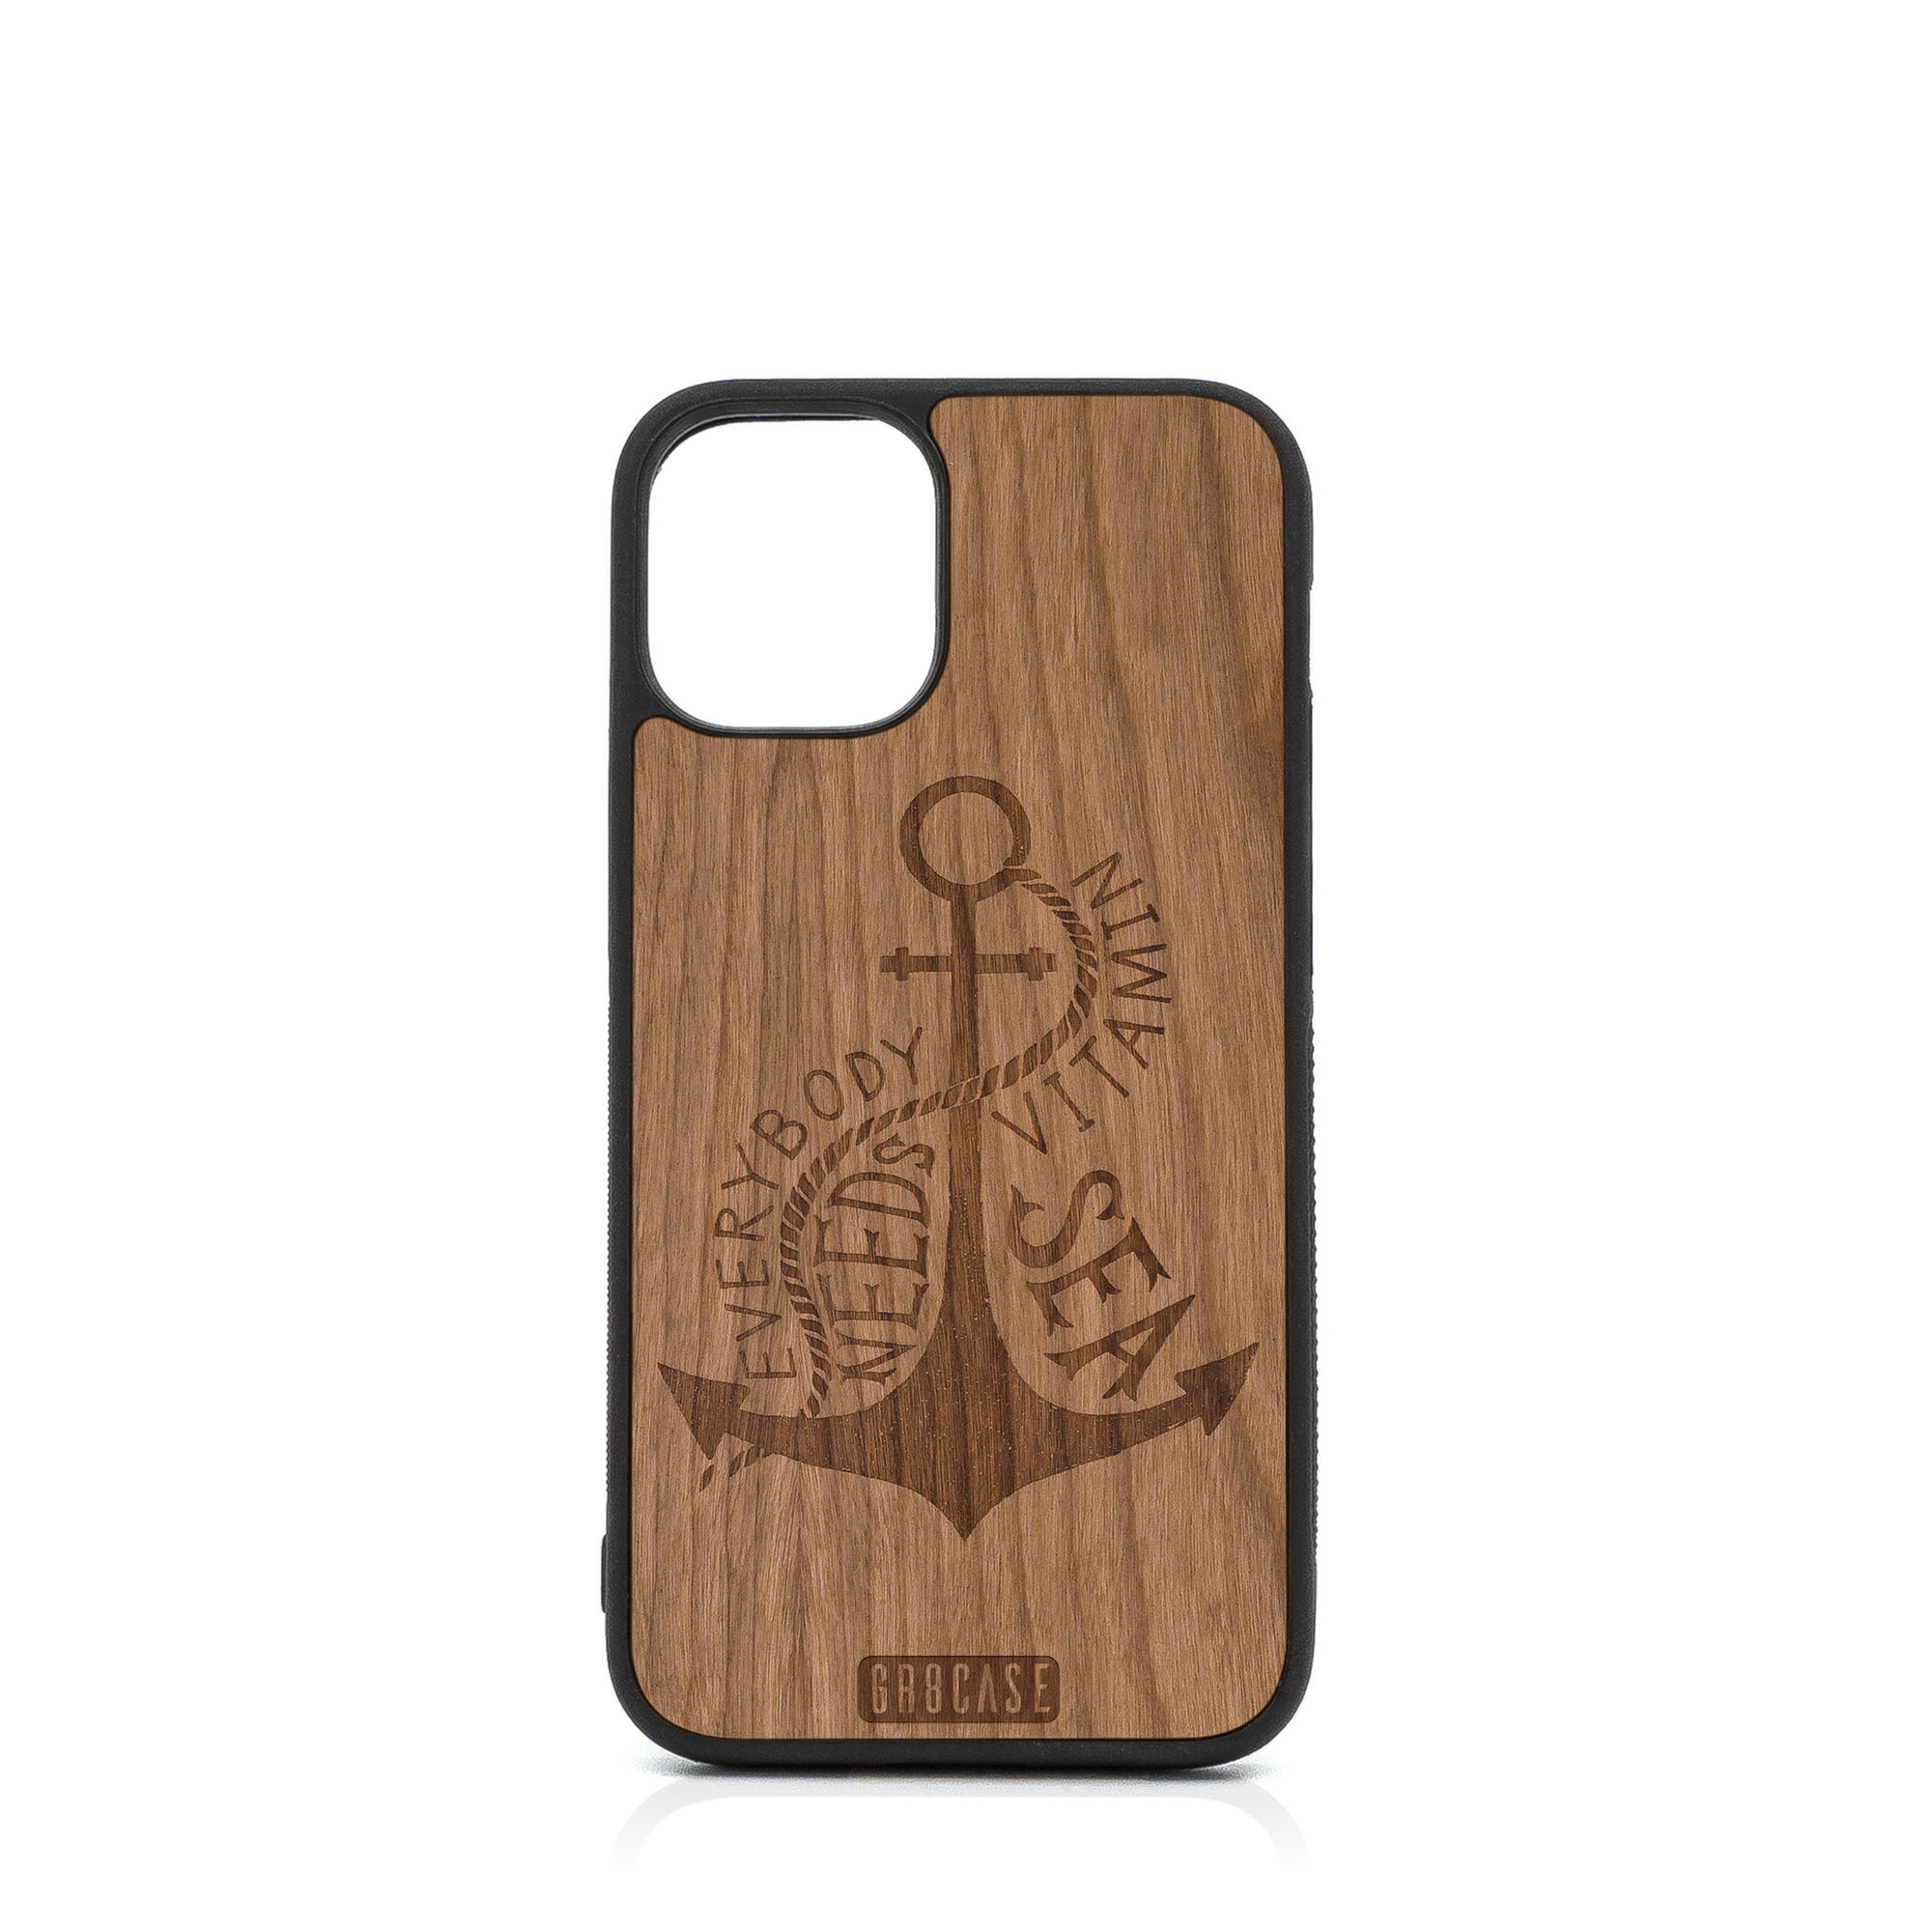 Everybody Needs Vitamin Sea (Anchor) Design Wood Case For iPhone 12 Mini